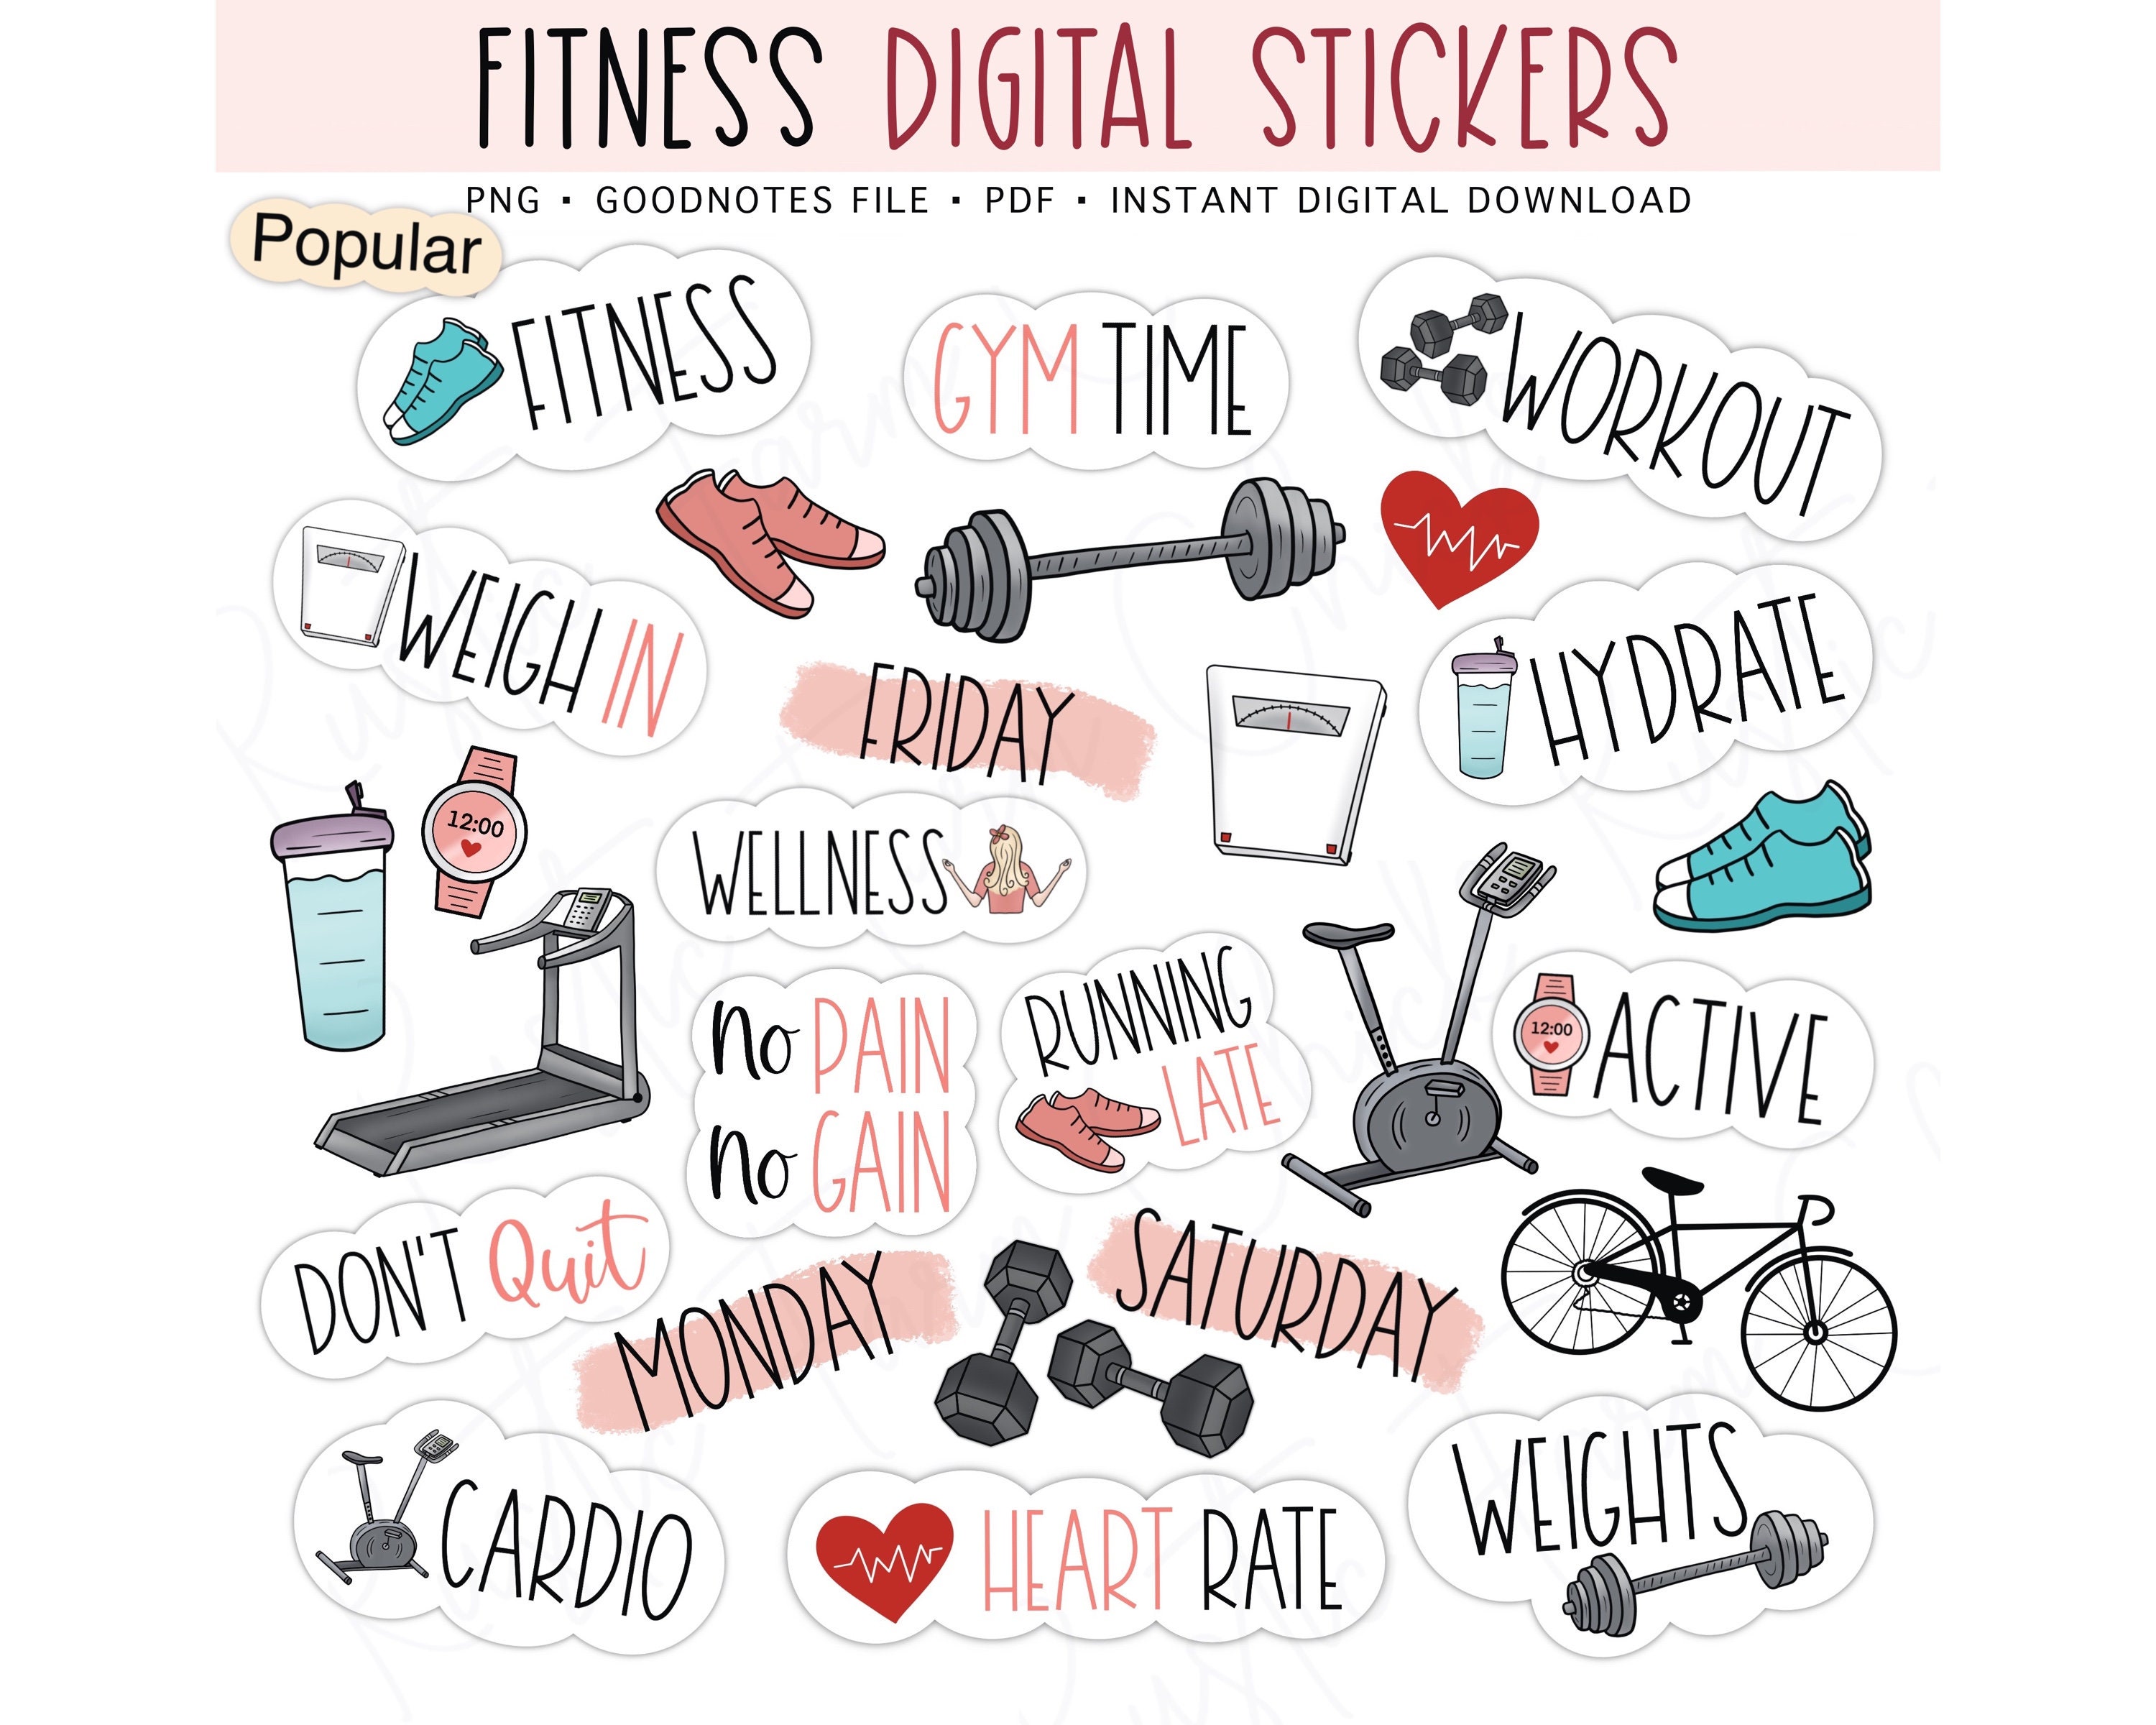 Gym Goals Motivation Straight Happiness - Best Fitness Gifts - Funny Gym - Funny  Gym Lover Gift - Sticker